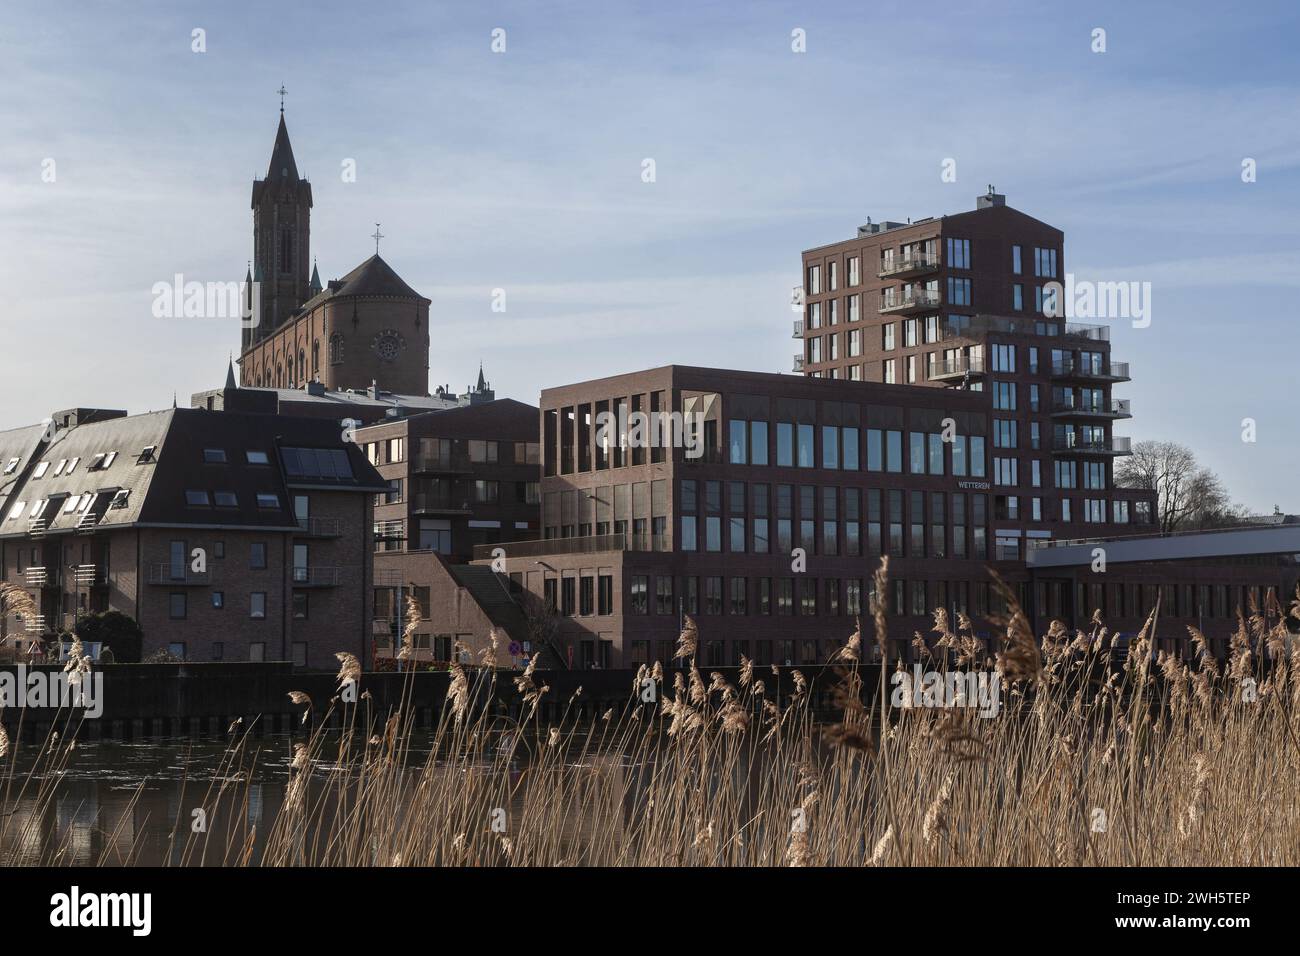 Wetteren city skyline with St Gertrudes church and the red hill buildings, in East Flanders, Belgium. View accross the Schelde river. Copy space above Stock Photo